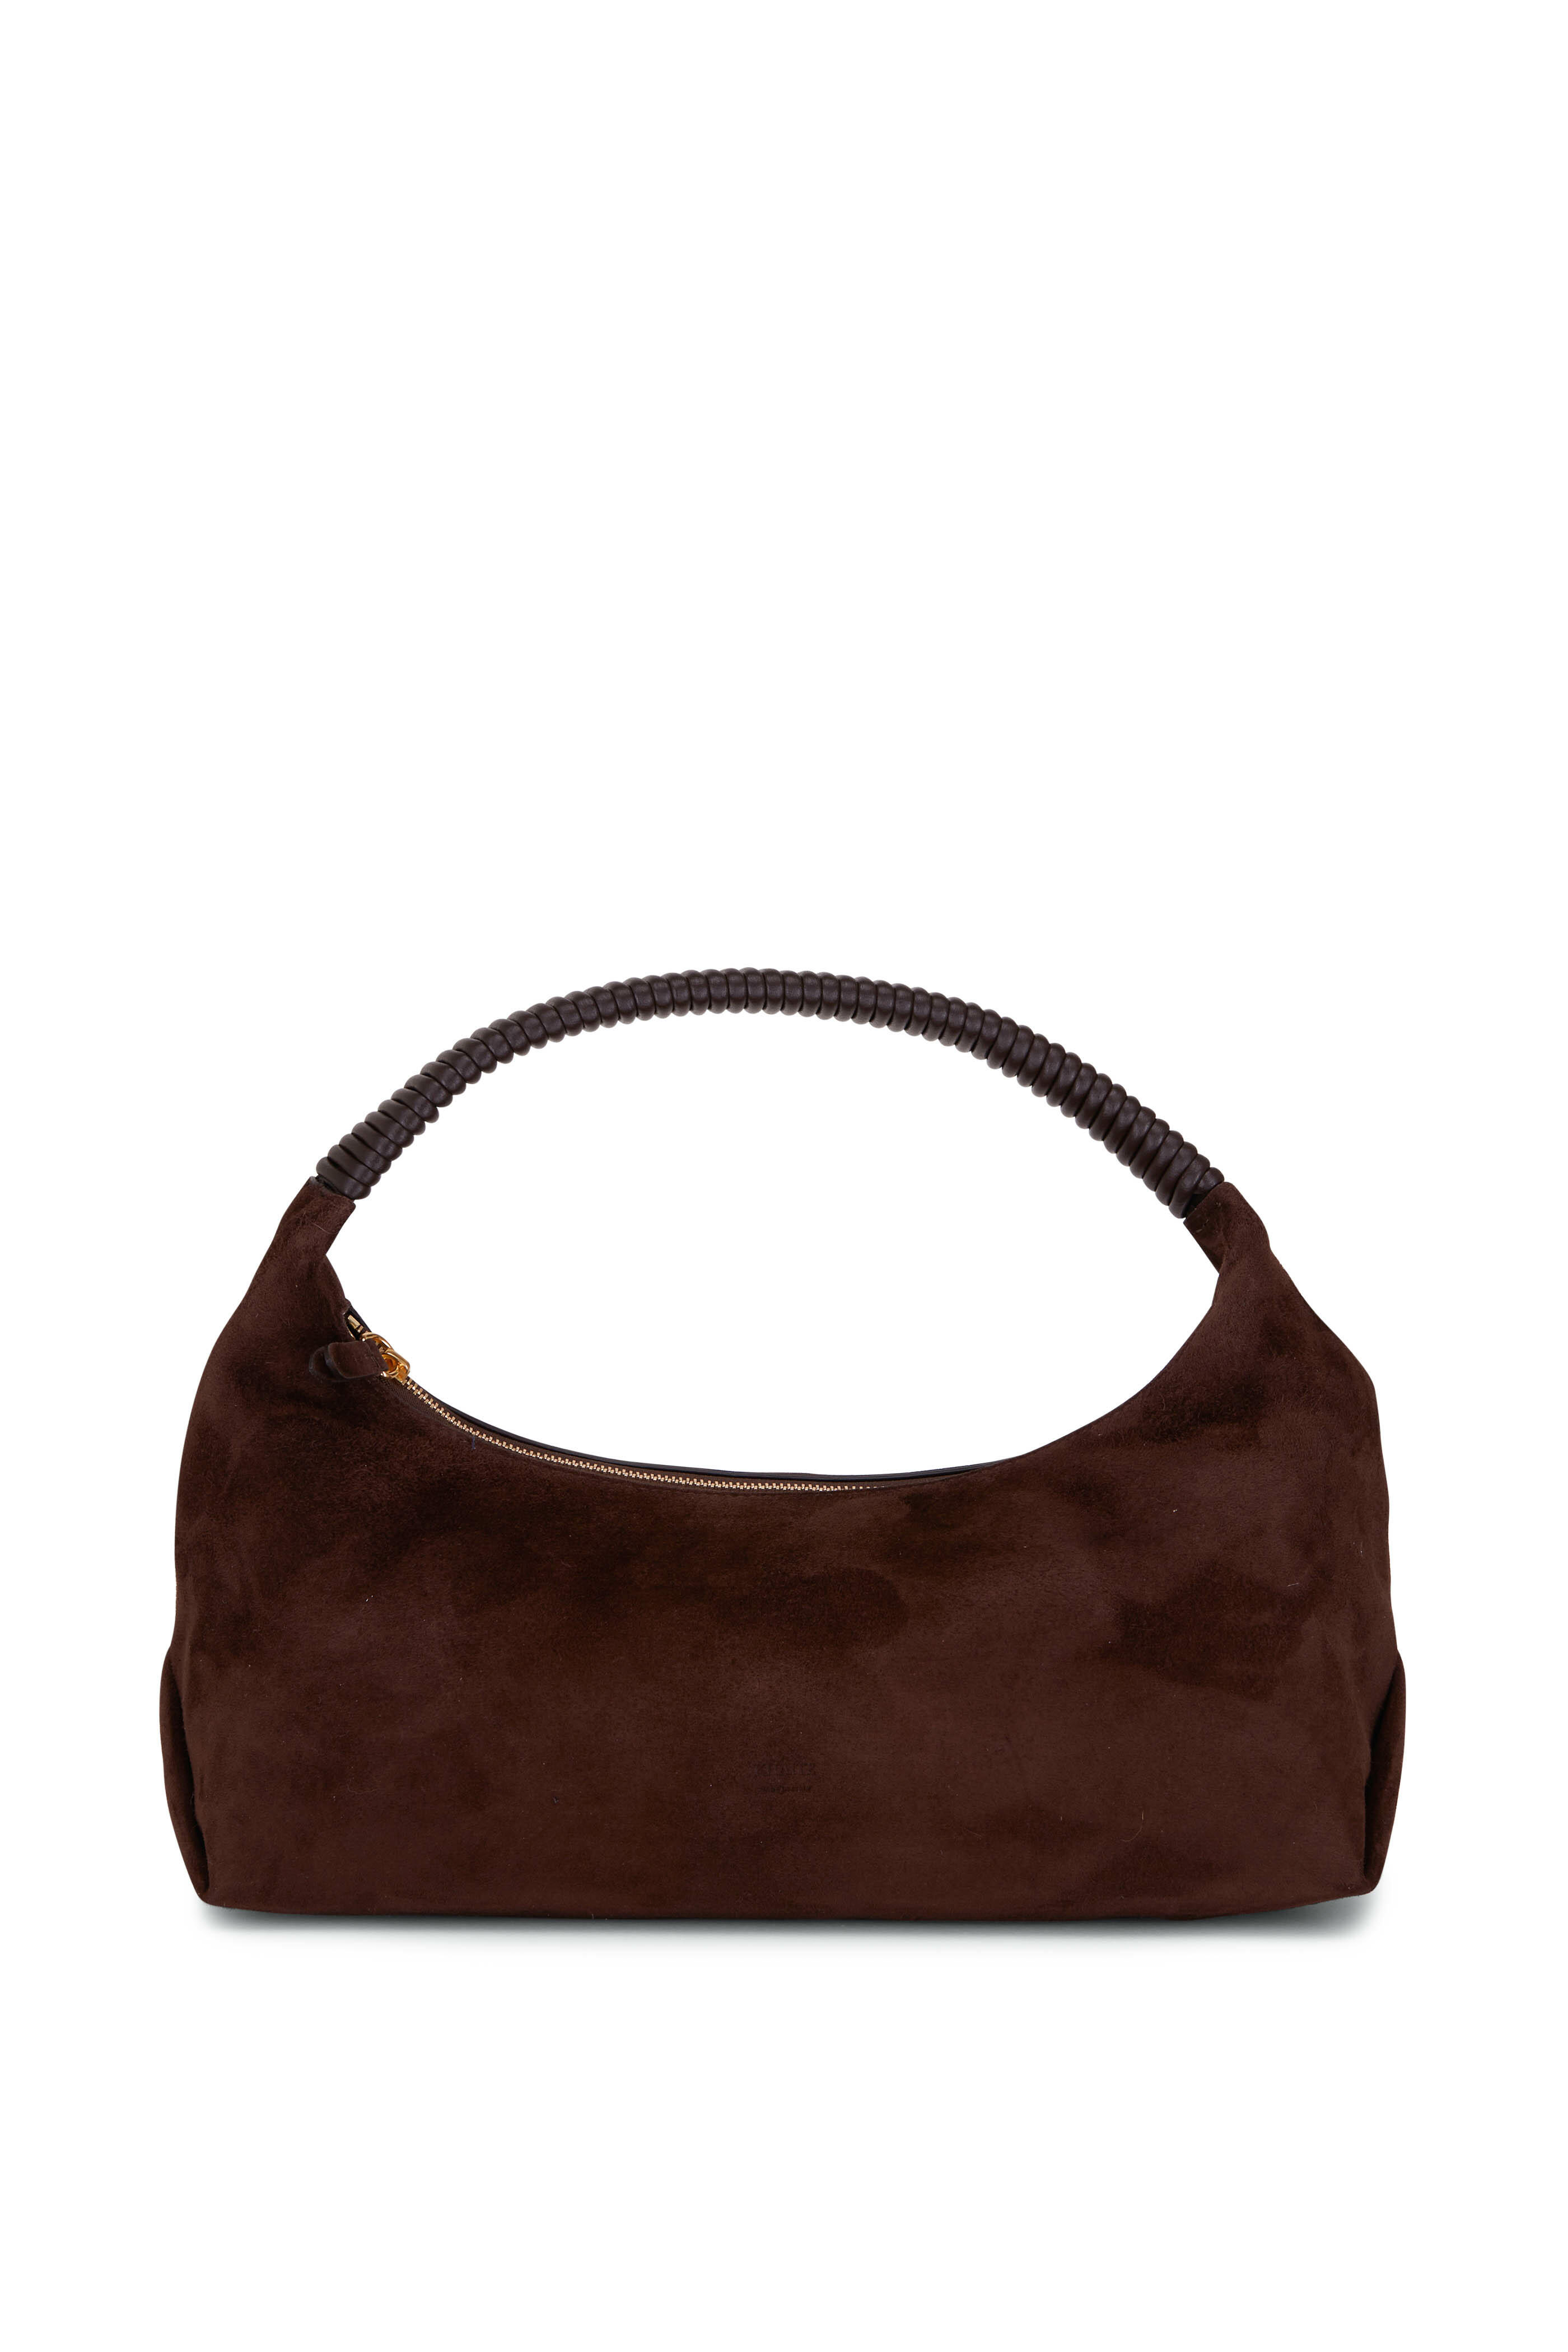 Khaite - The Remi Coffee Suede Hobo Bag | Mitchell Stores